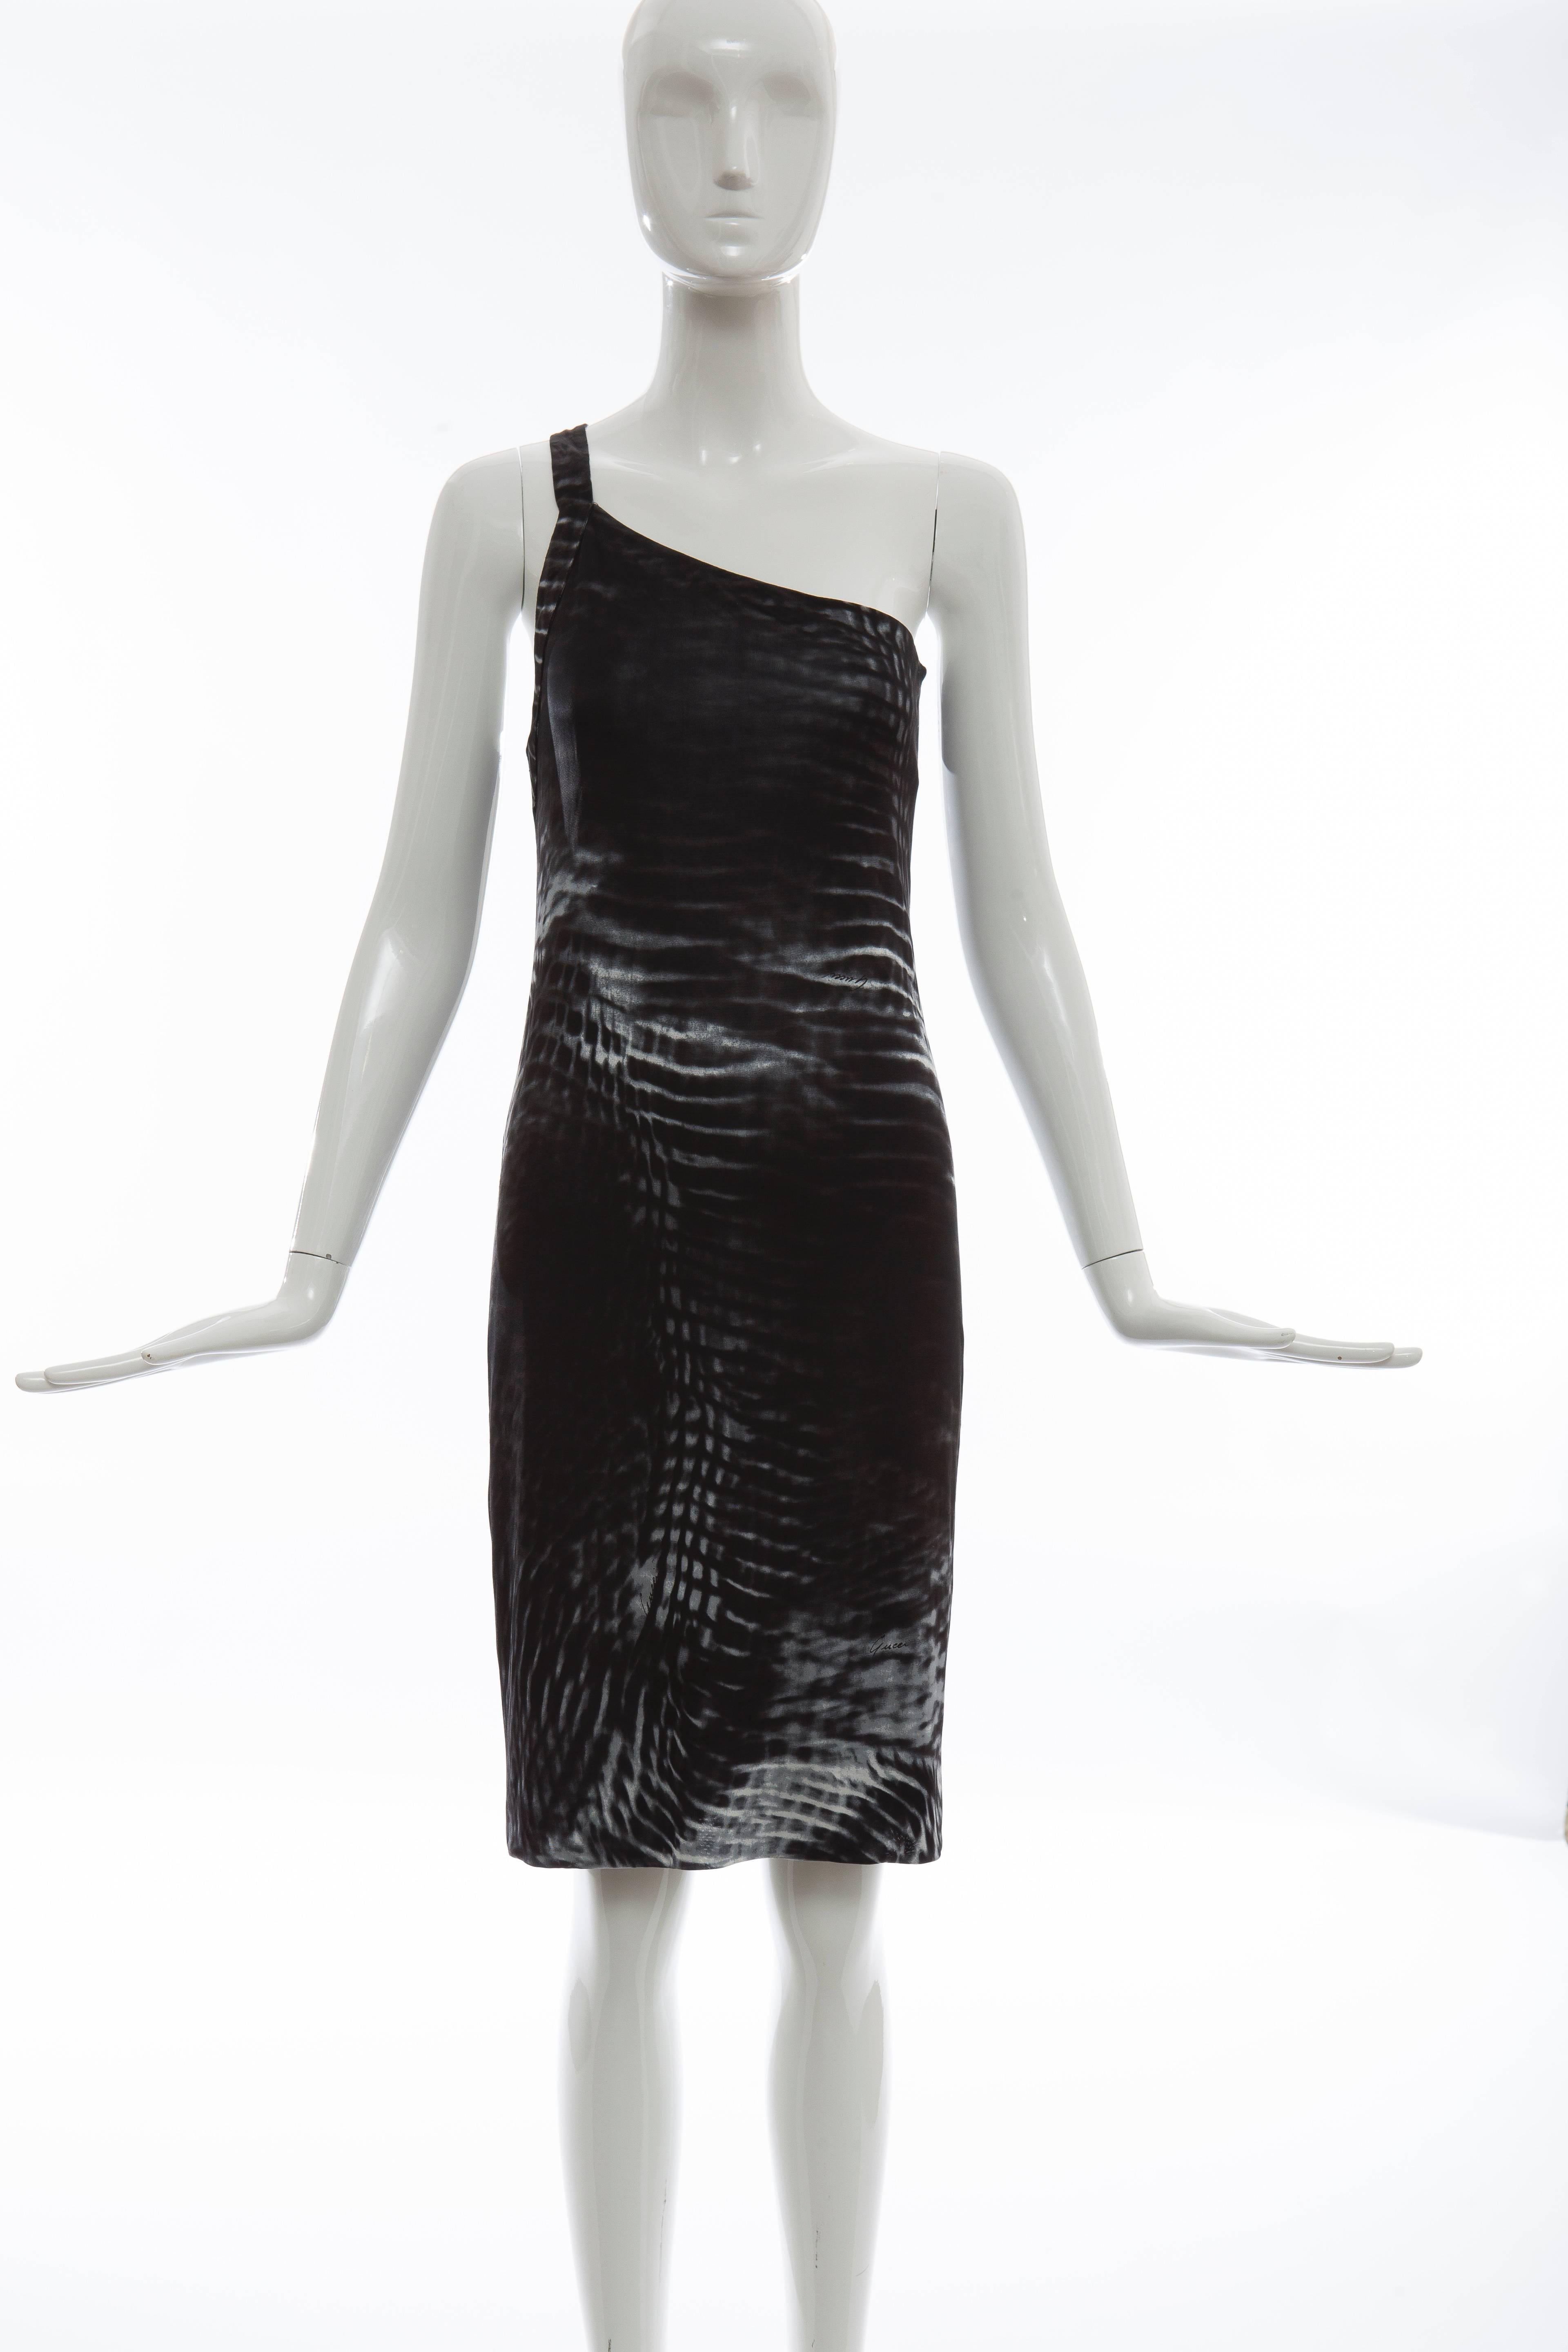 Tom Ford for Gucci, Spring-Summer 2000 one-shoulder dress with abstract print throughout, thin single strap and tonal stitching.

IT.38
US. 2

Bust: 30